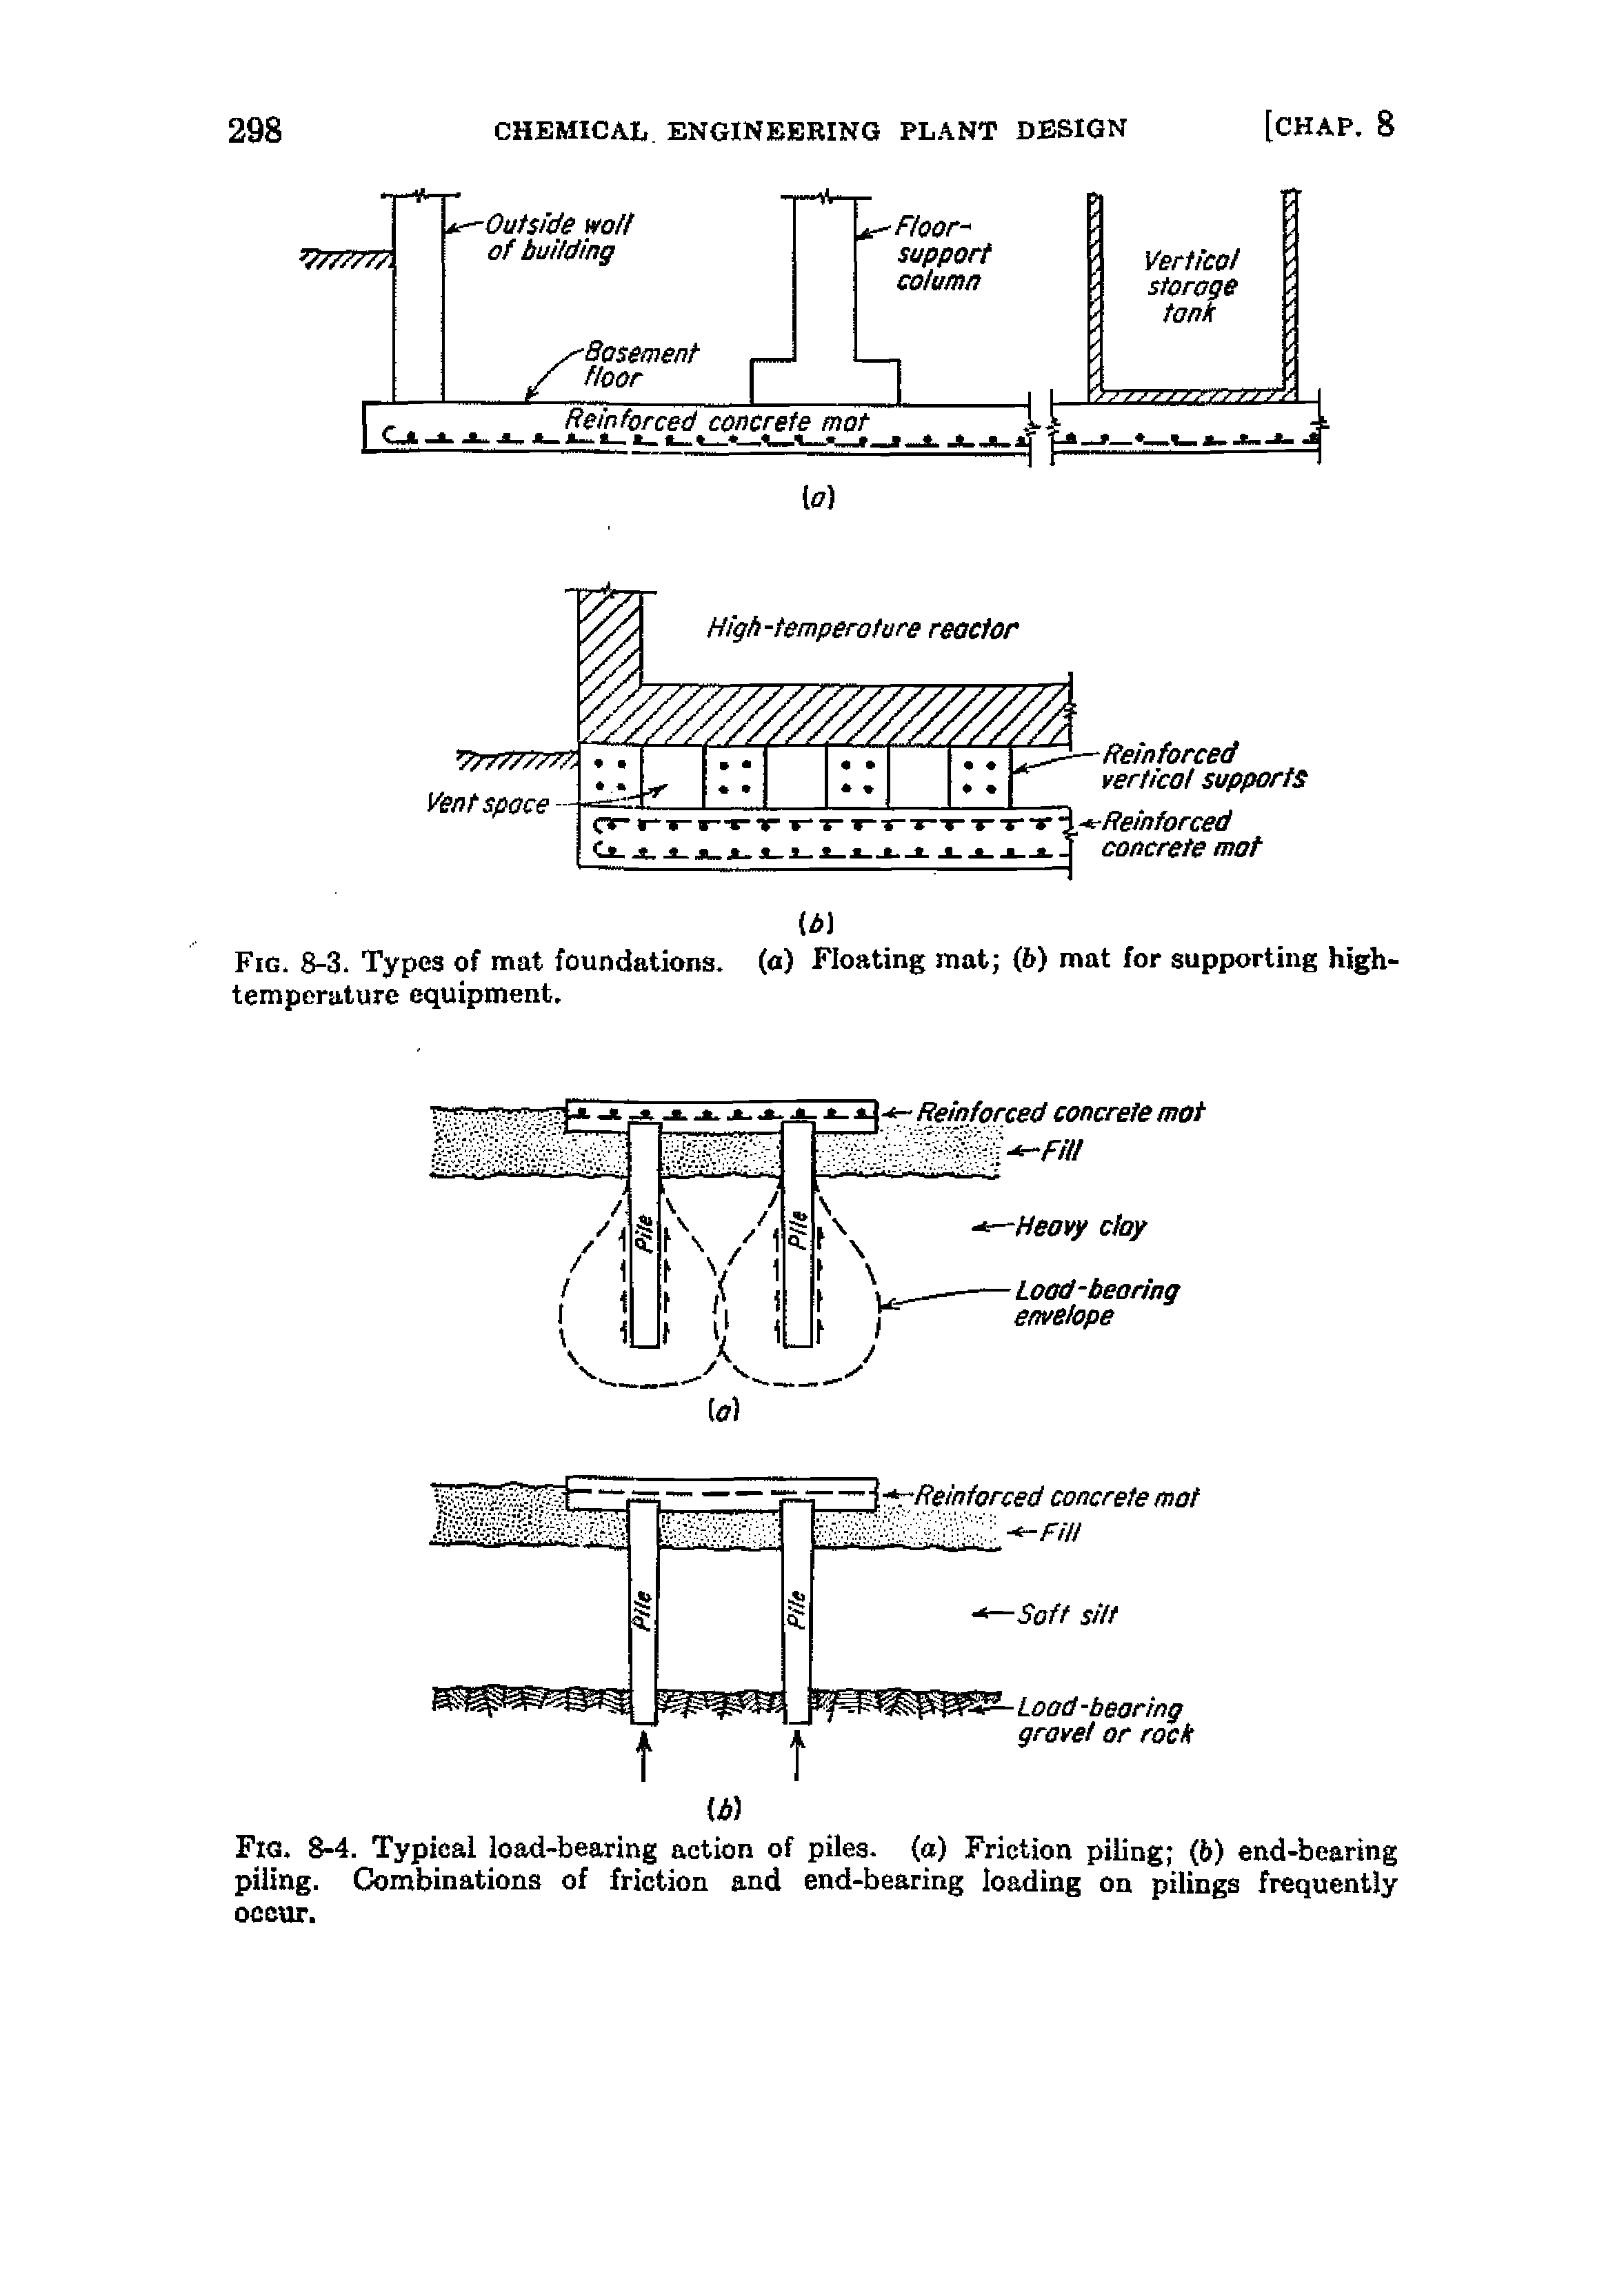 Fig. 8-3. Types of mat foundations, (a) Floating mat (6) mat for supporting high-temperature equipment.